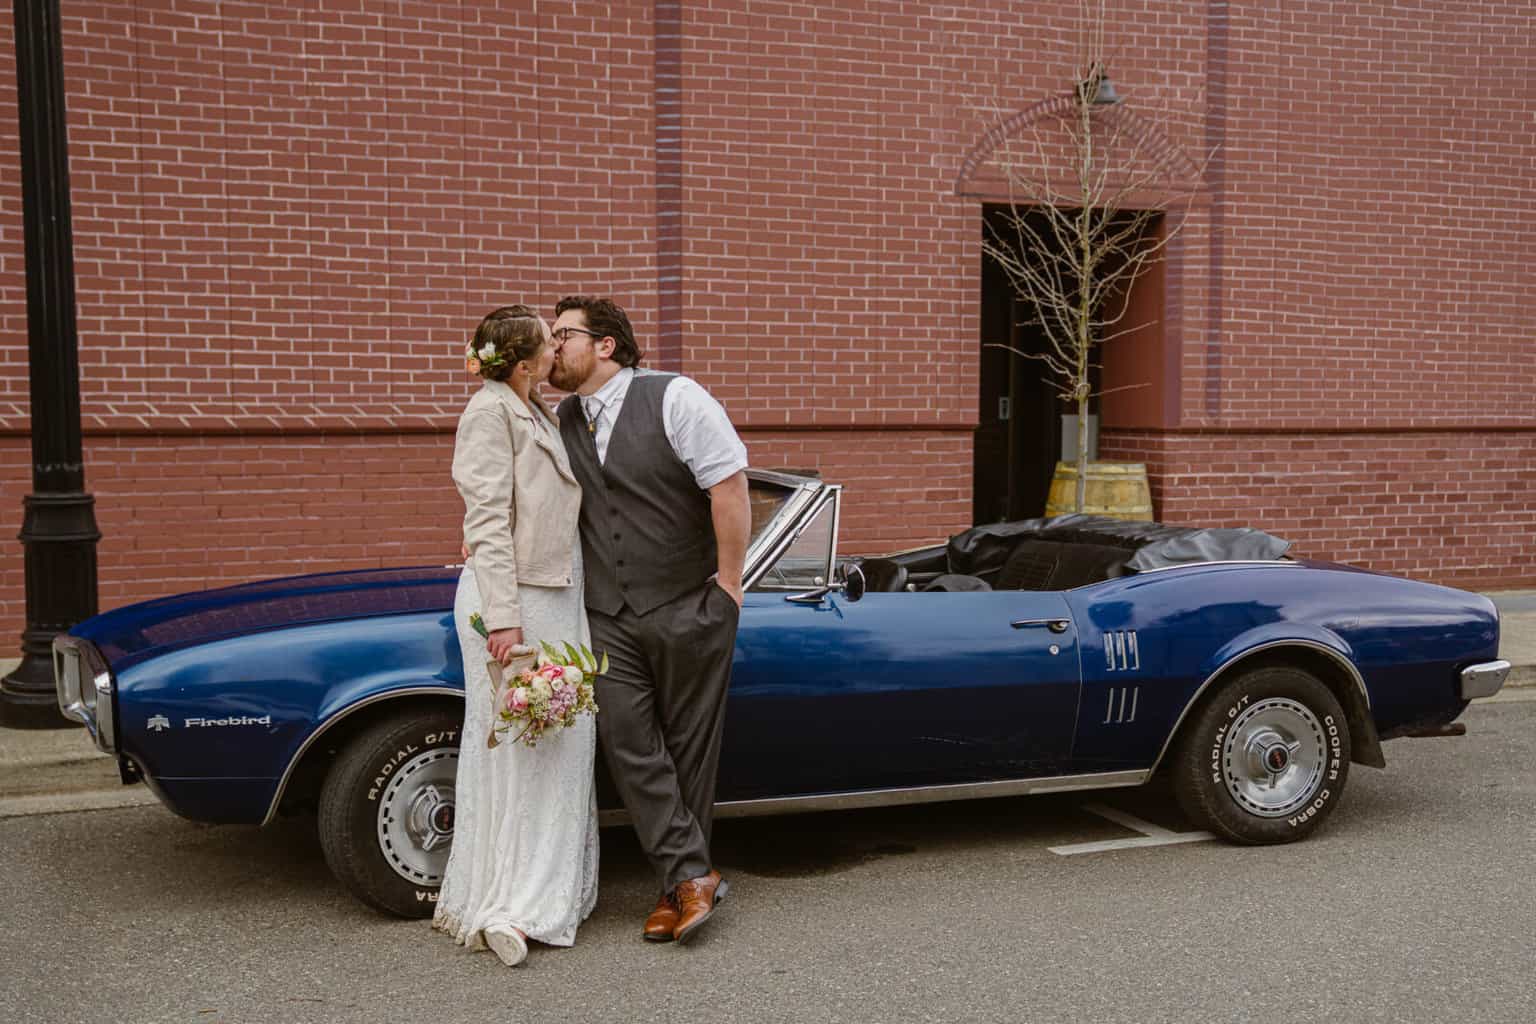 Couple enjoys a kiss next to their classic car on their adventure elopement in Snoqualmie